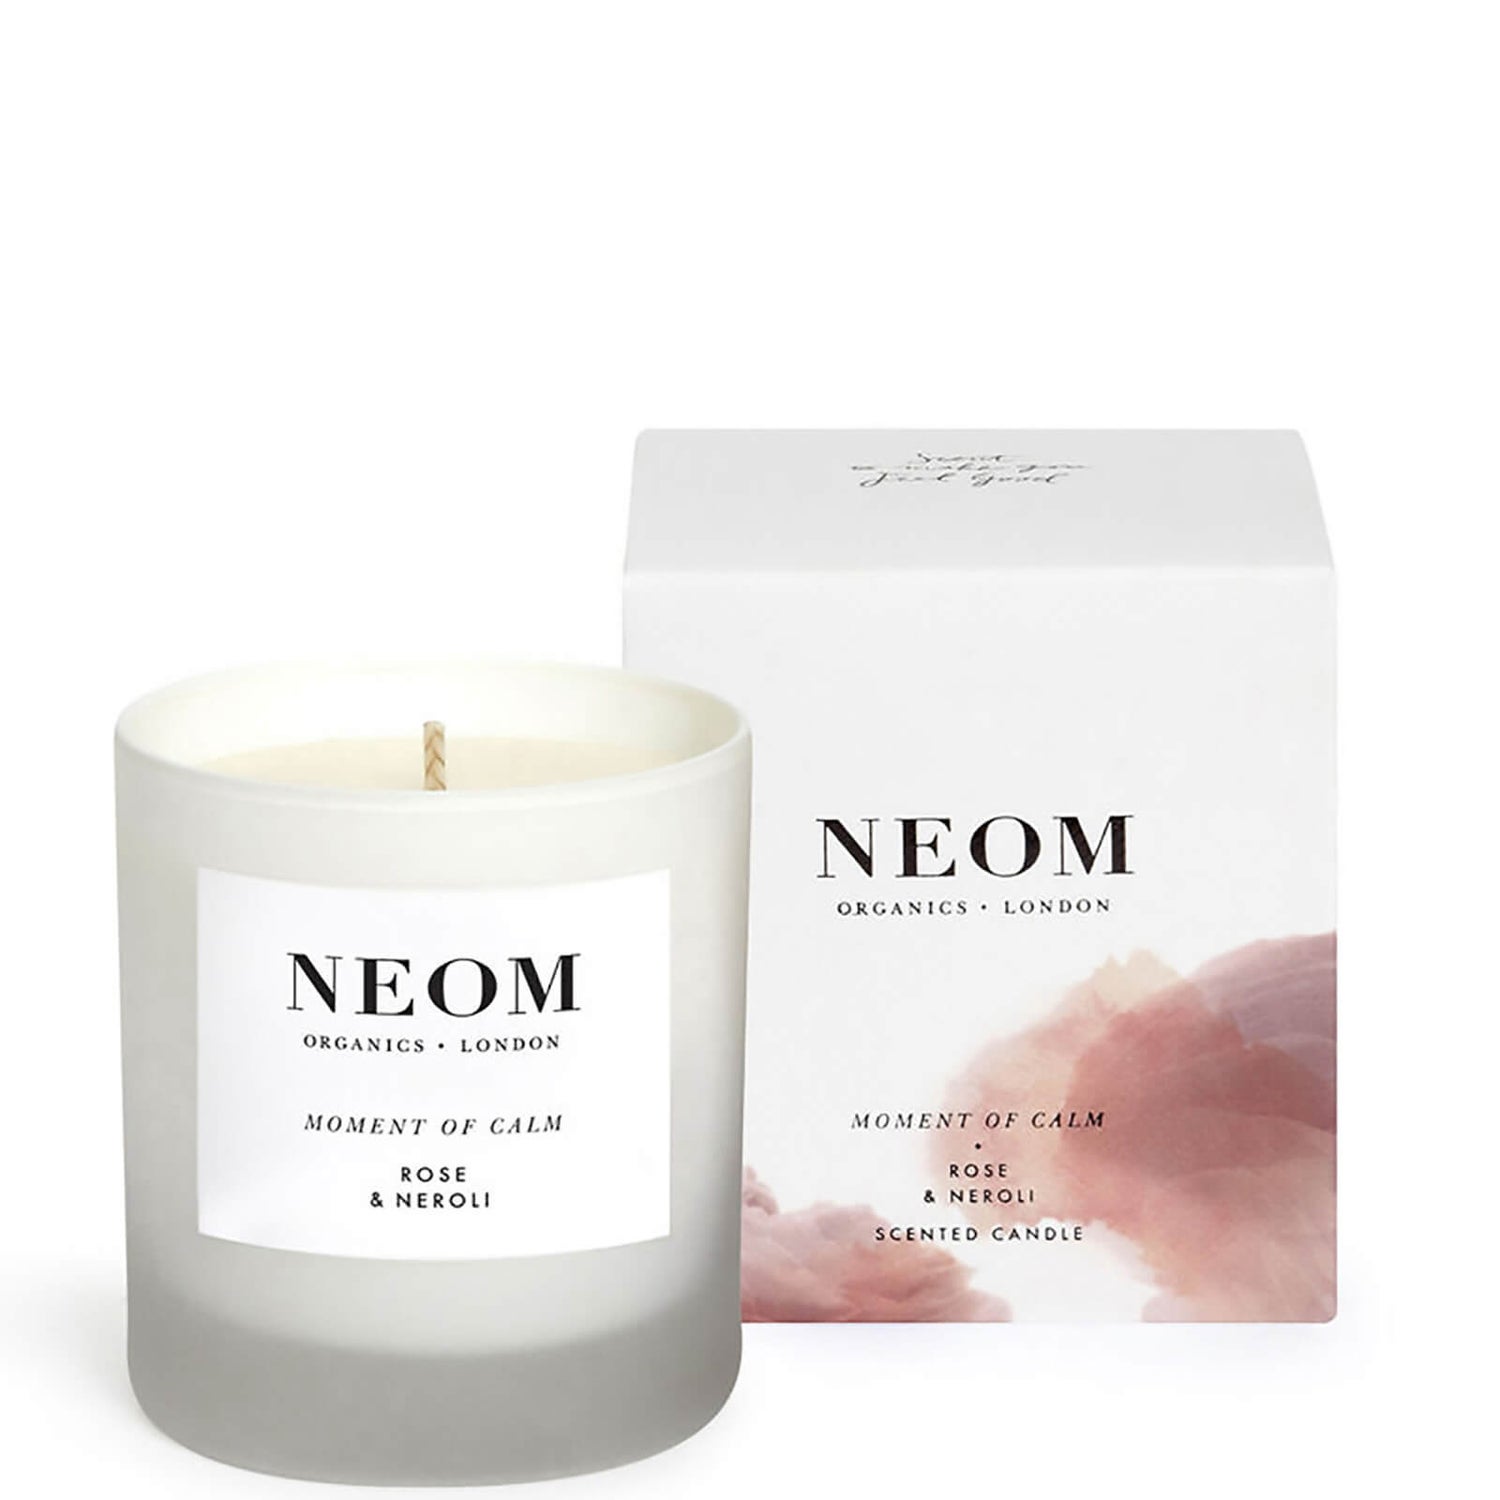 NEOM Organics Moment of Calm Standard Scented Candle